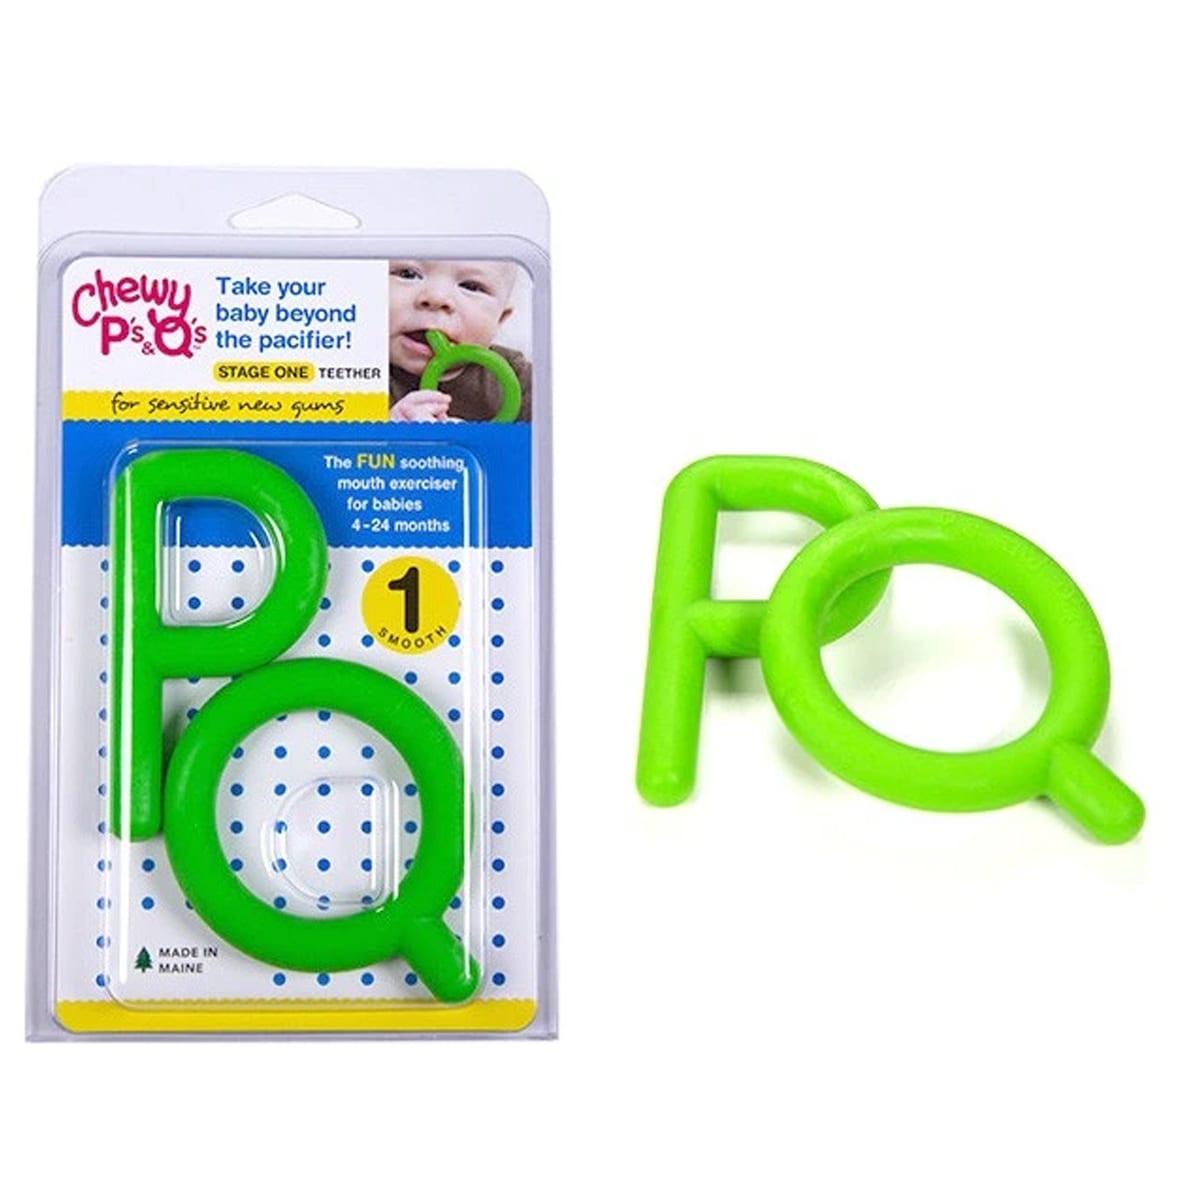 PS & QS - GREEN- STAGE 1 TEETHER - CHEWY TUBE®